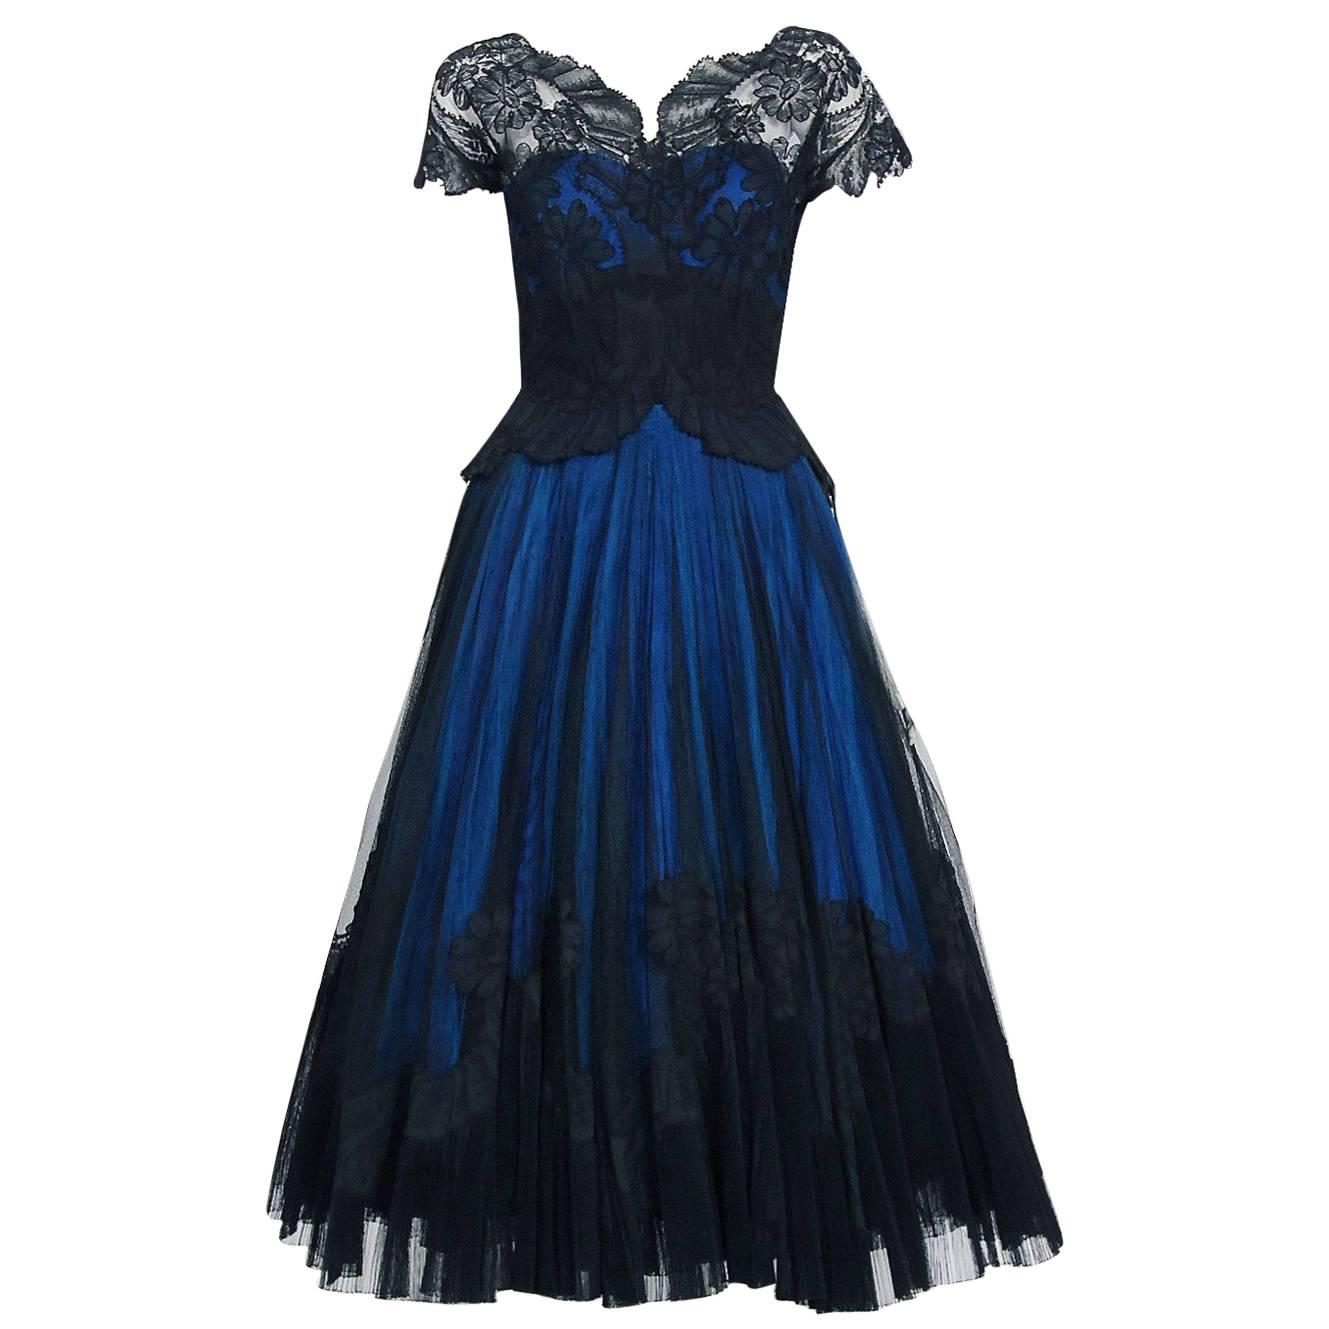 1955 Digby Morton Couture Black & Blue Floral Lace Illusion Pleated Party Dress